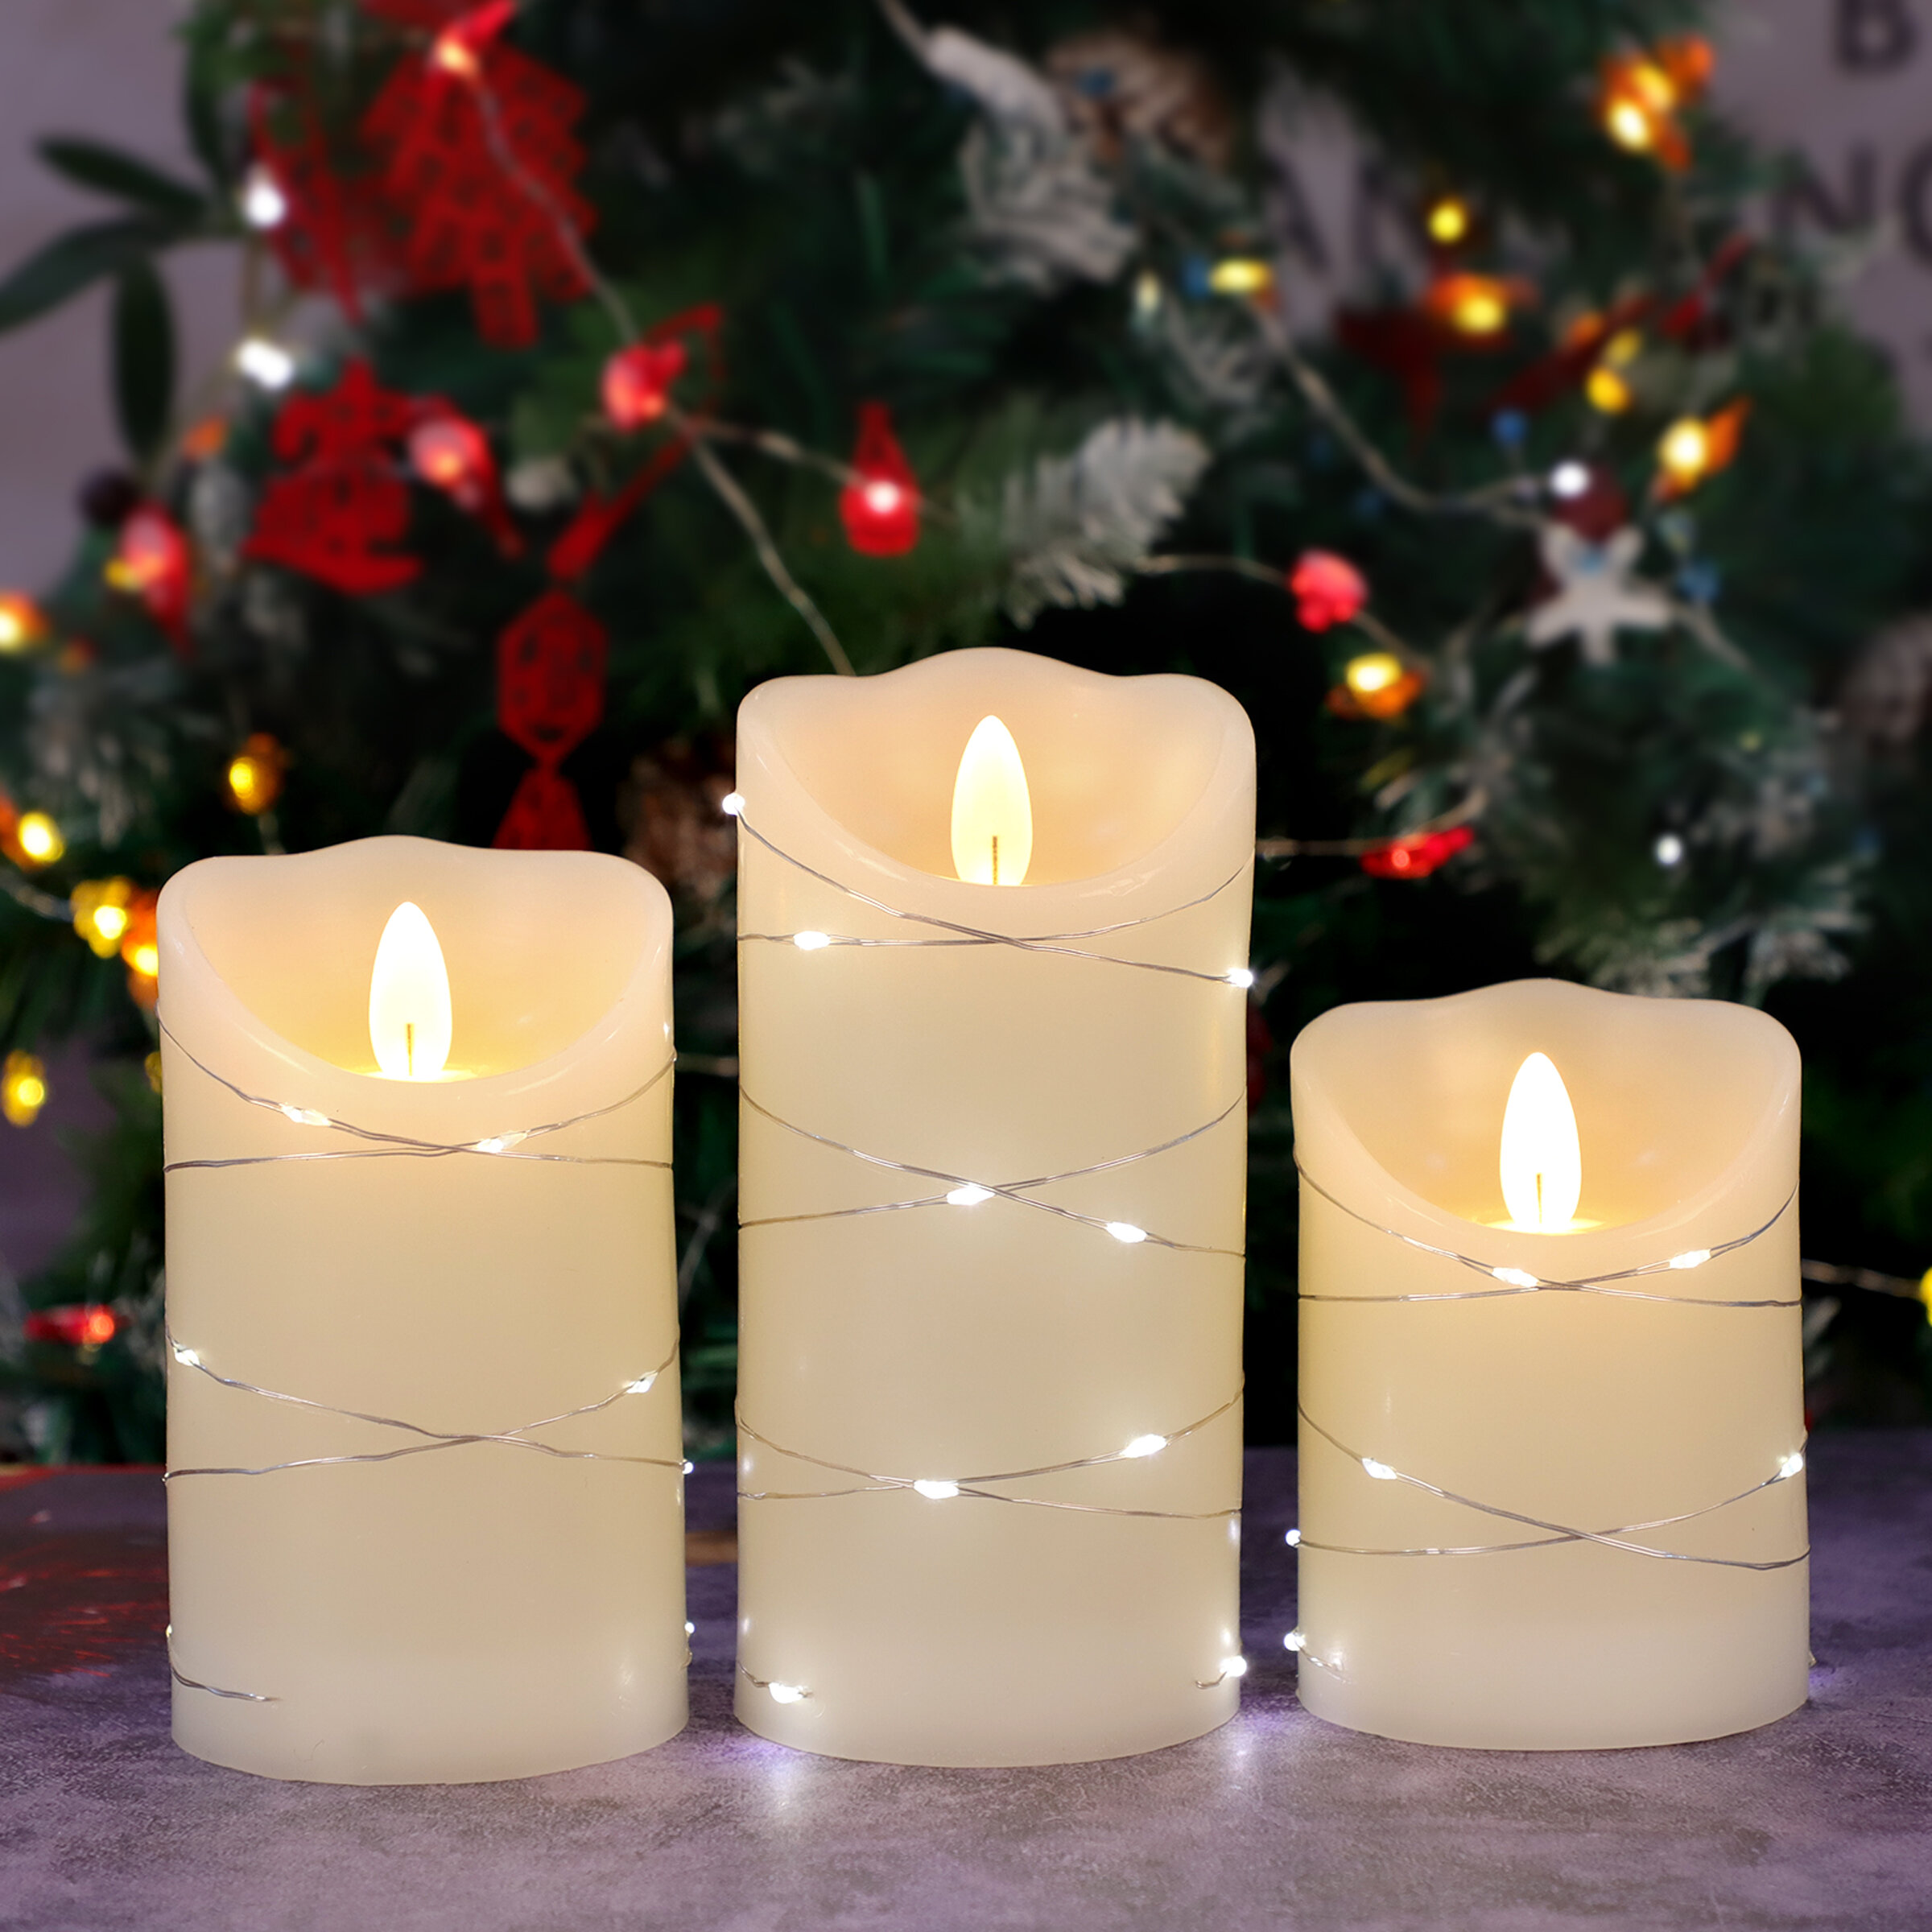 Konstsmide LED Tree Lighting, Set of 12 Cordless Tree Candles with